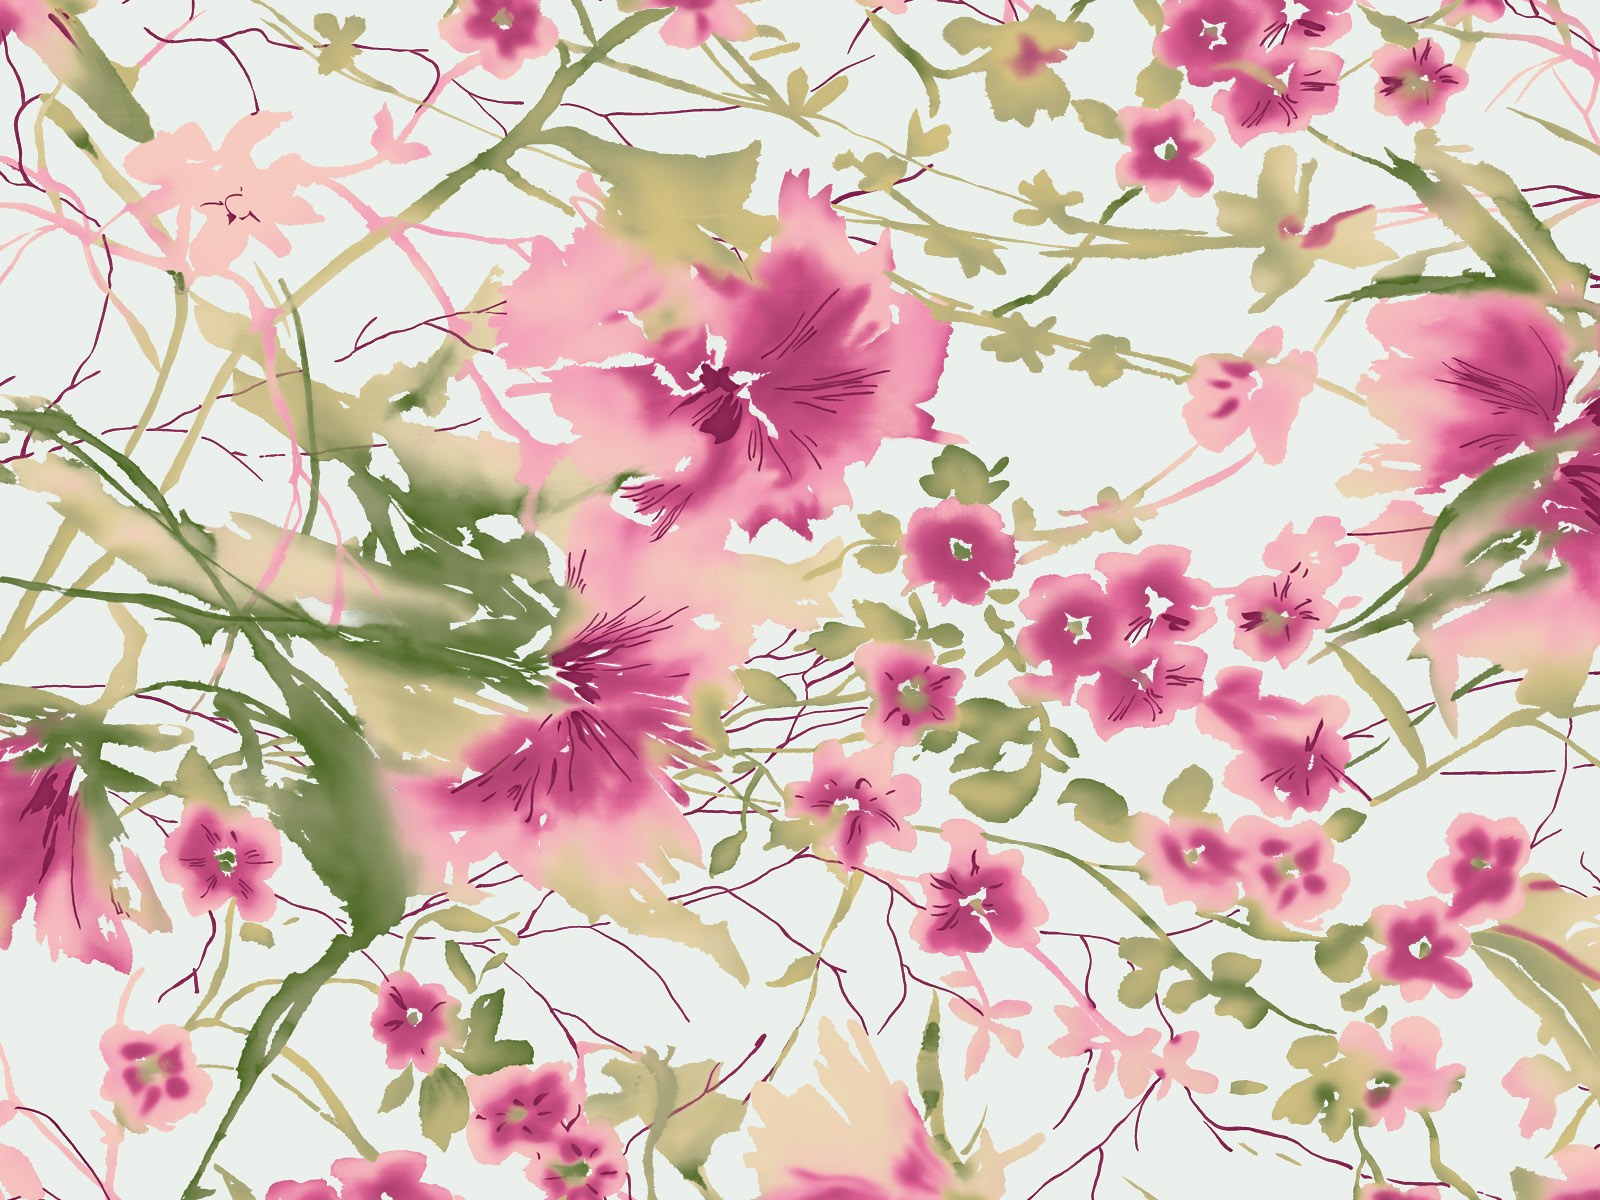 Artistic the Pastel Shades Flower Patterns 34 | Art style flower 